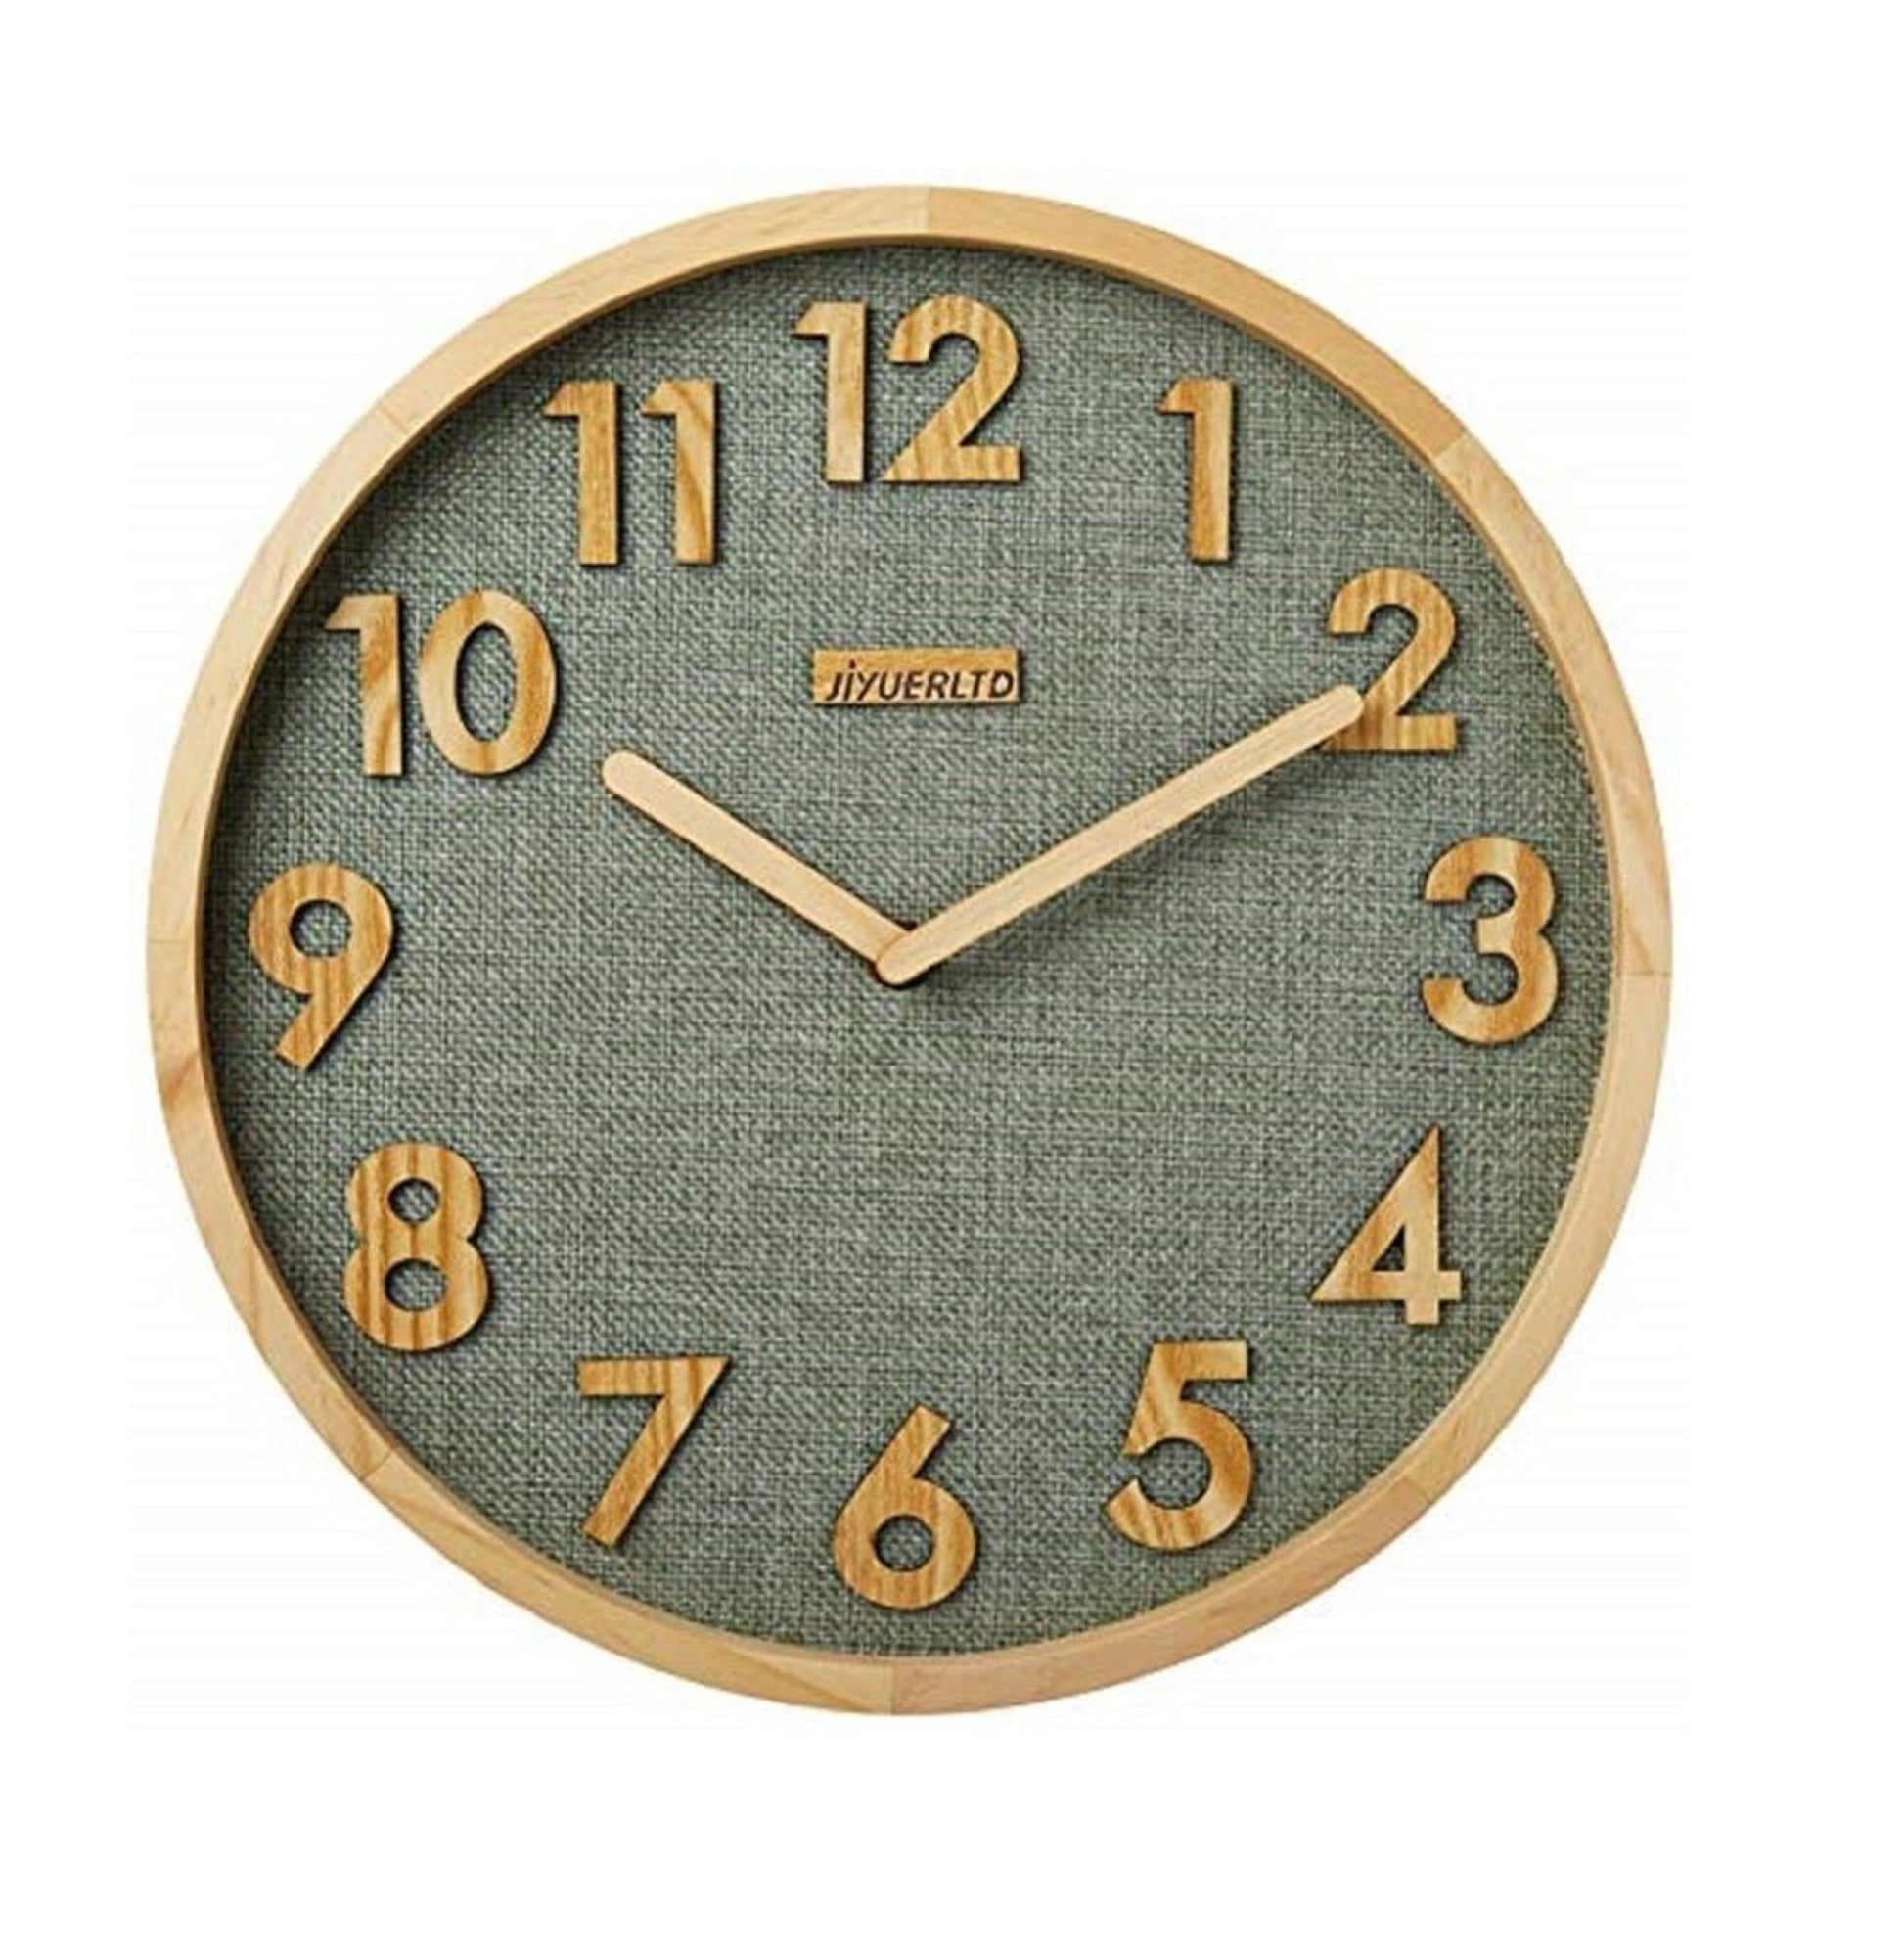 JIYUERLTD Silent Wall Clock 12 In Kitchen Clock with 3D Wood Numbers, Non-Ticking Quartz Movement, Linen Face and Wood Frame for Home, Office, Classroom(Green) - JIYUERLTDJIYUERLTD Silent Wall Clock 12 In Kitchen Clock with 3D Wood Numbers, Non-Ticking Quartz Movement, Linen Face and Wood Frame for Home, Office, Classroom(Green)